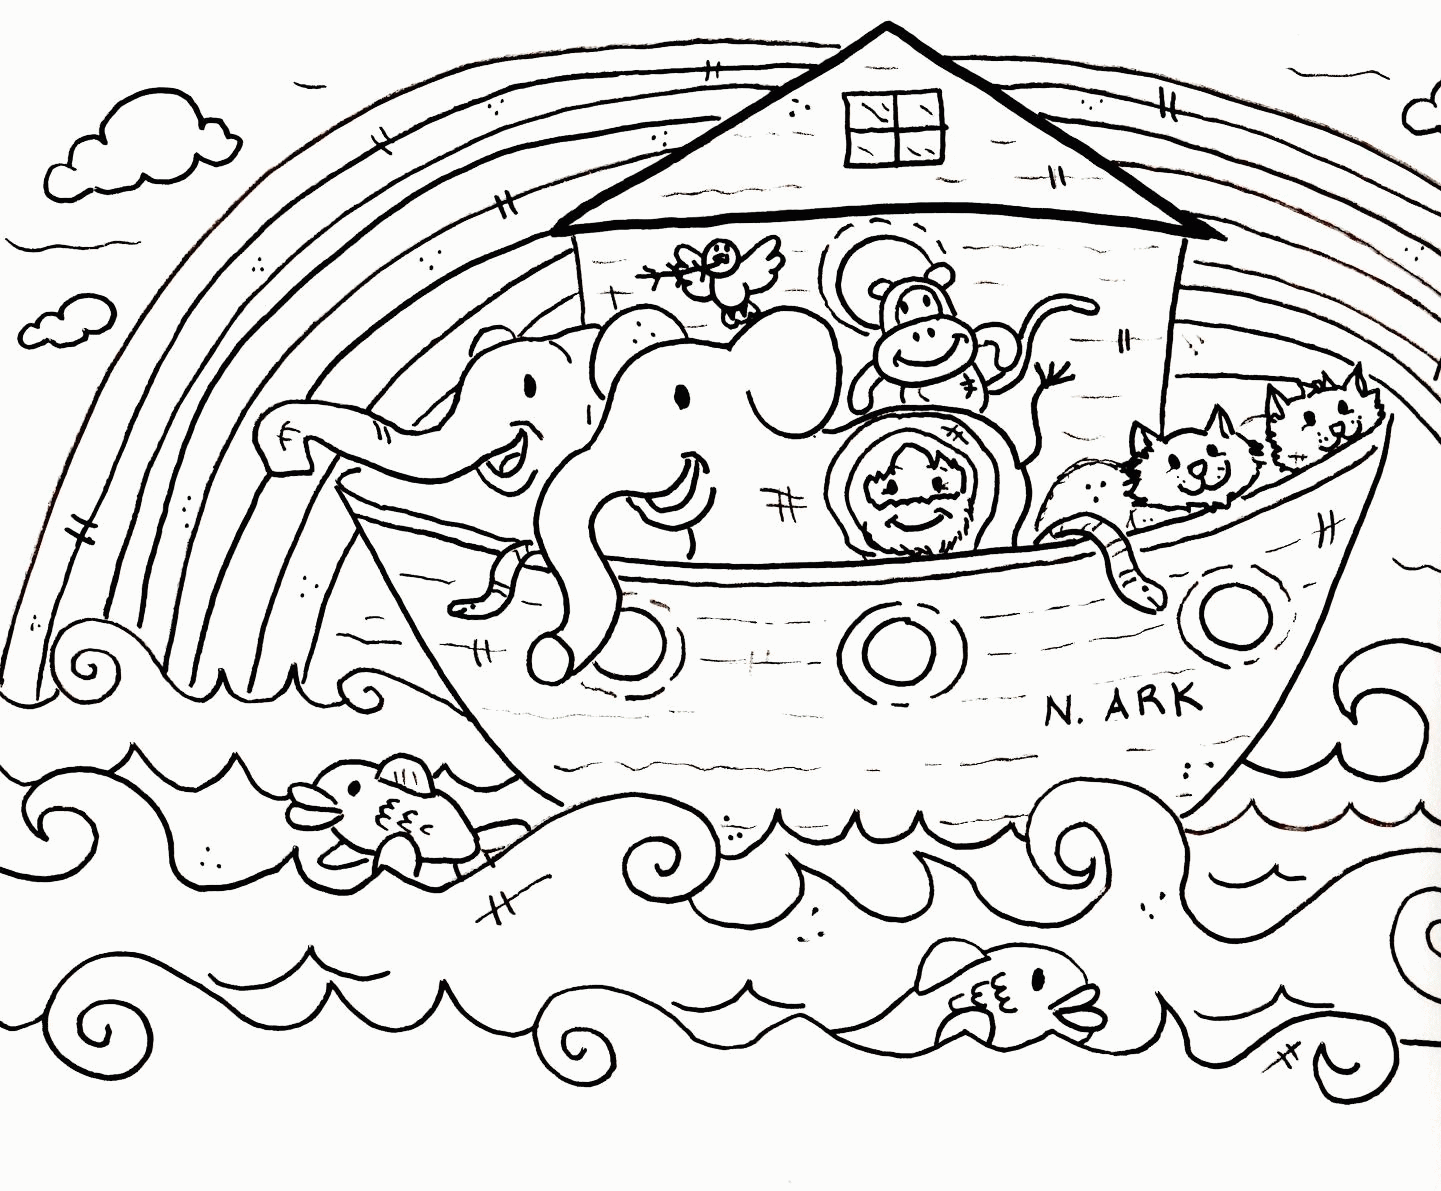 coloring-page-amusing-free-bible-coloring-page-for-kids-free-coloring